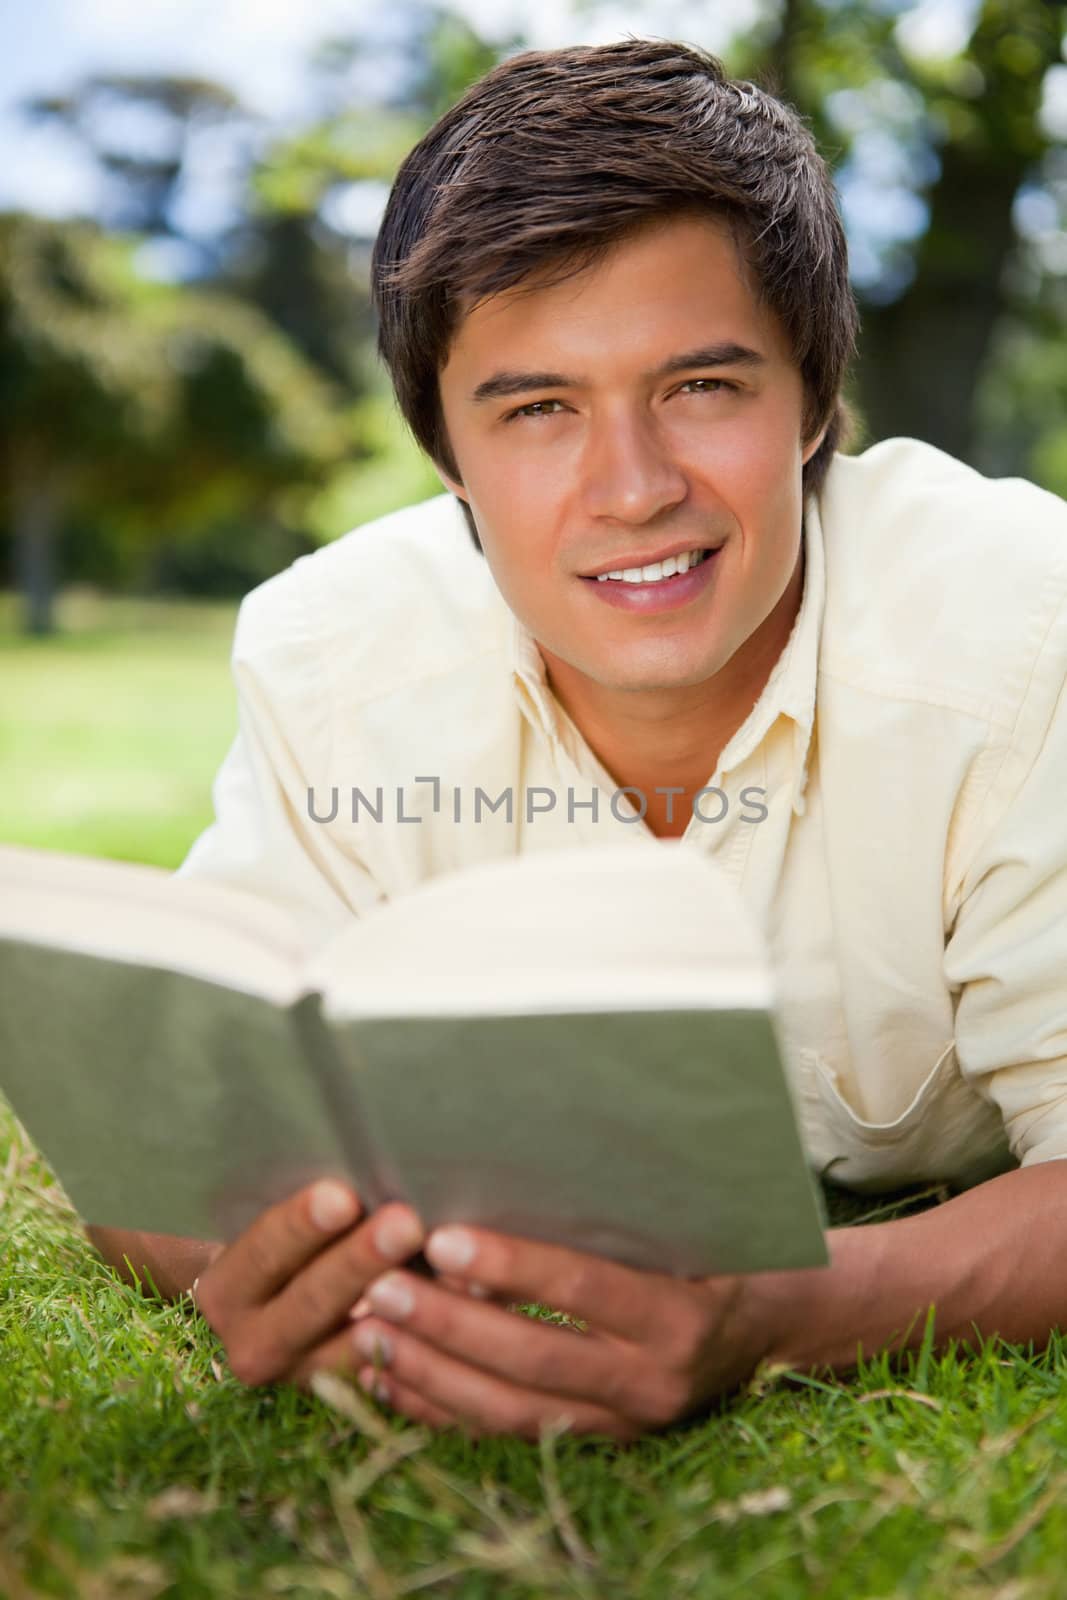 Man looking straight ahead of him and smiling while reading a book as he lies on grass